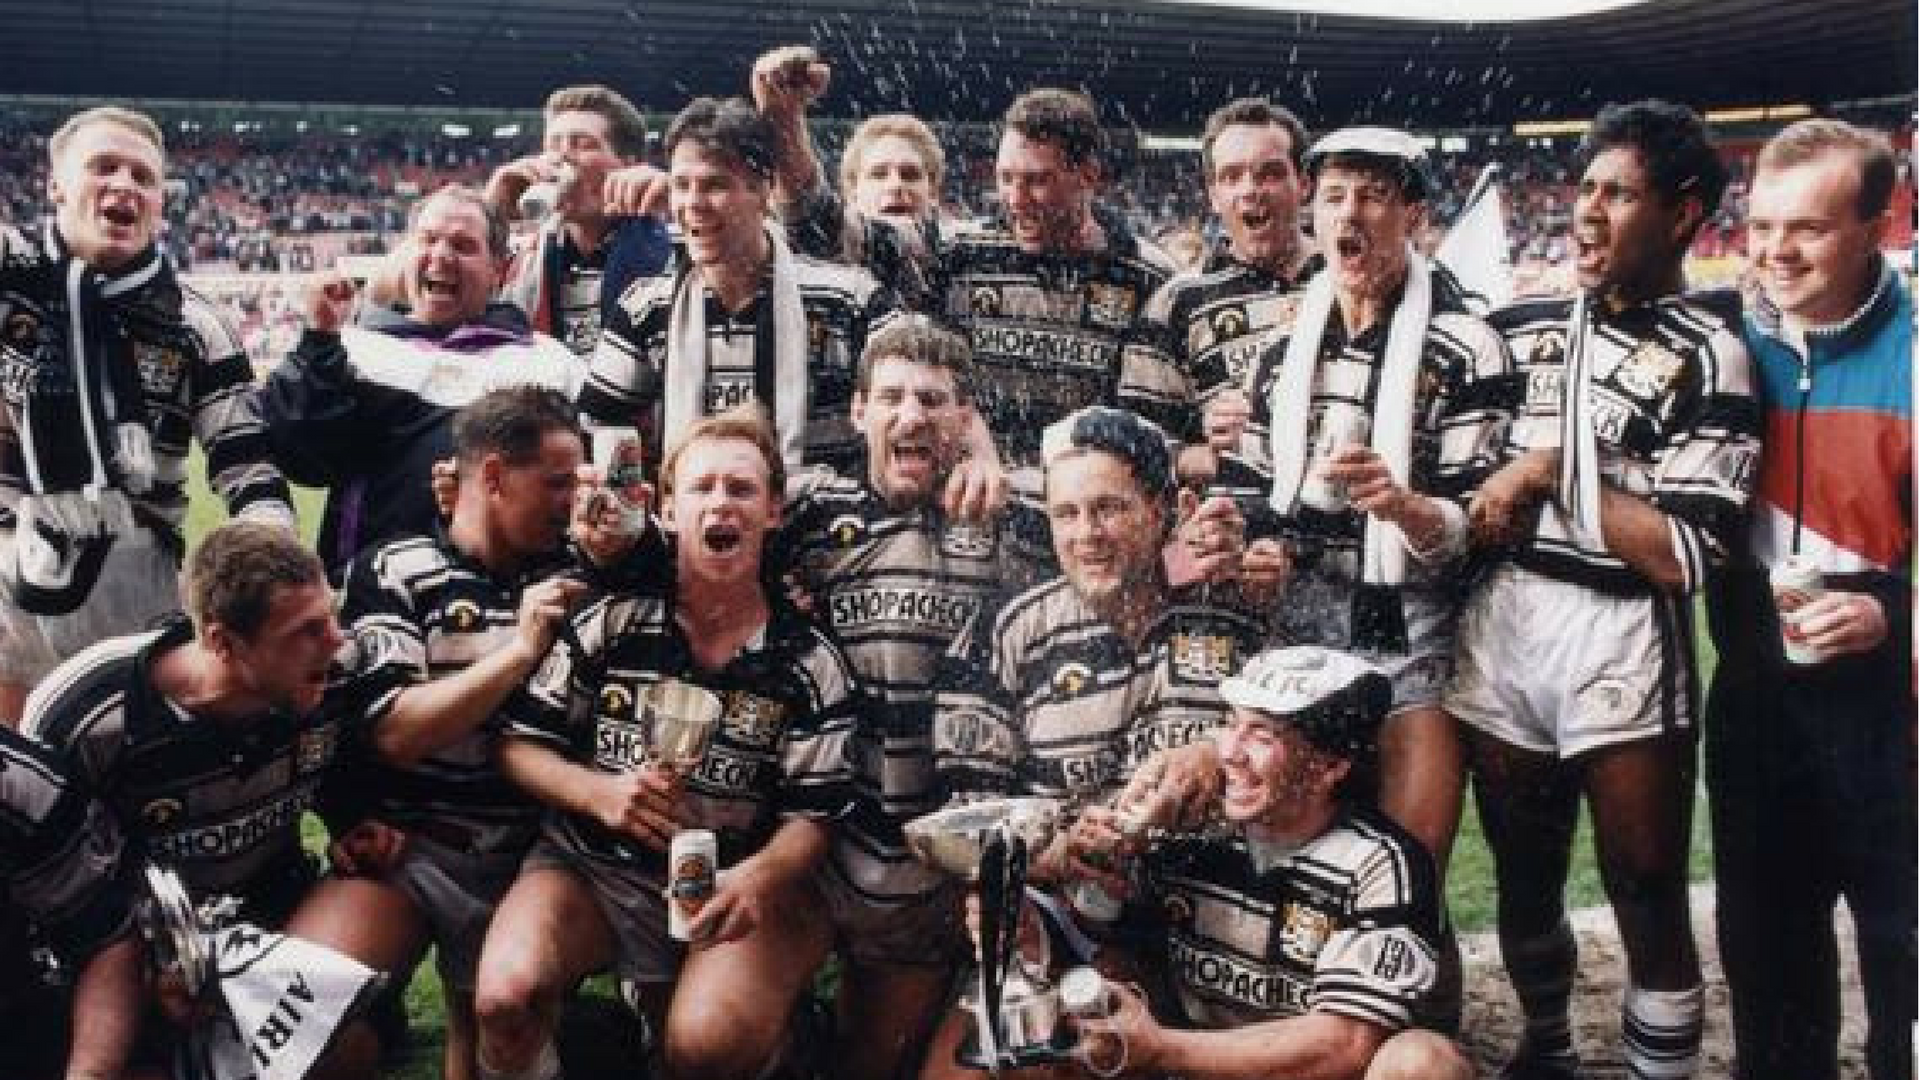 Hull FC won their only Premiership title in 1991 against Widnes at Old Trafford.